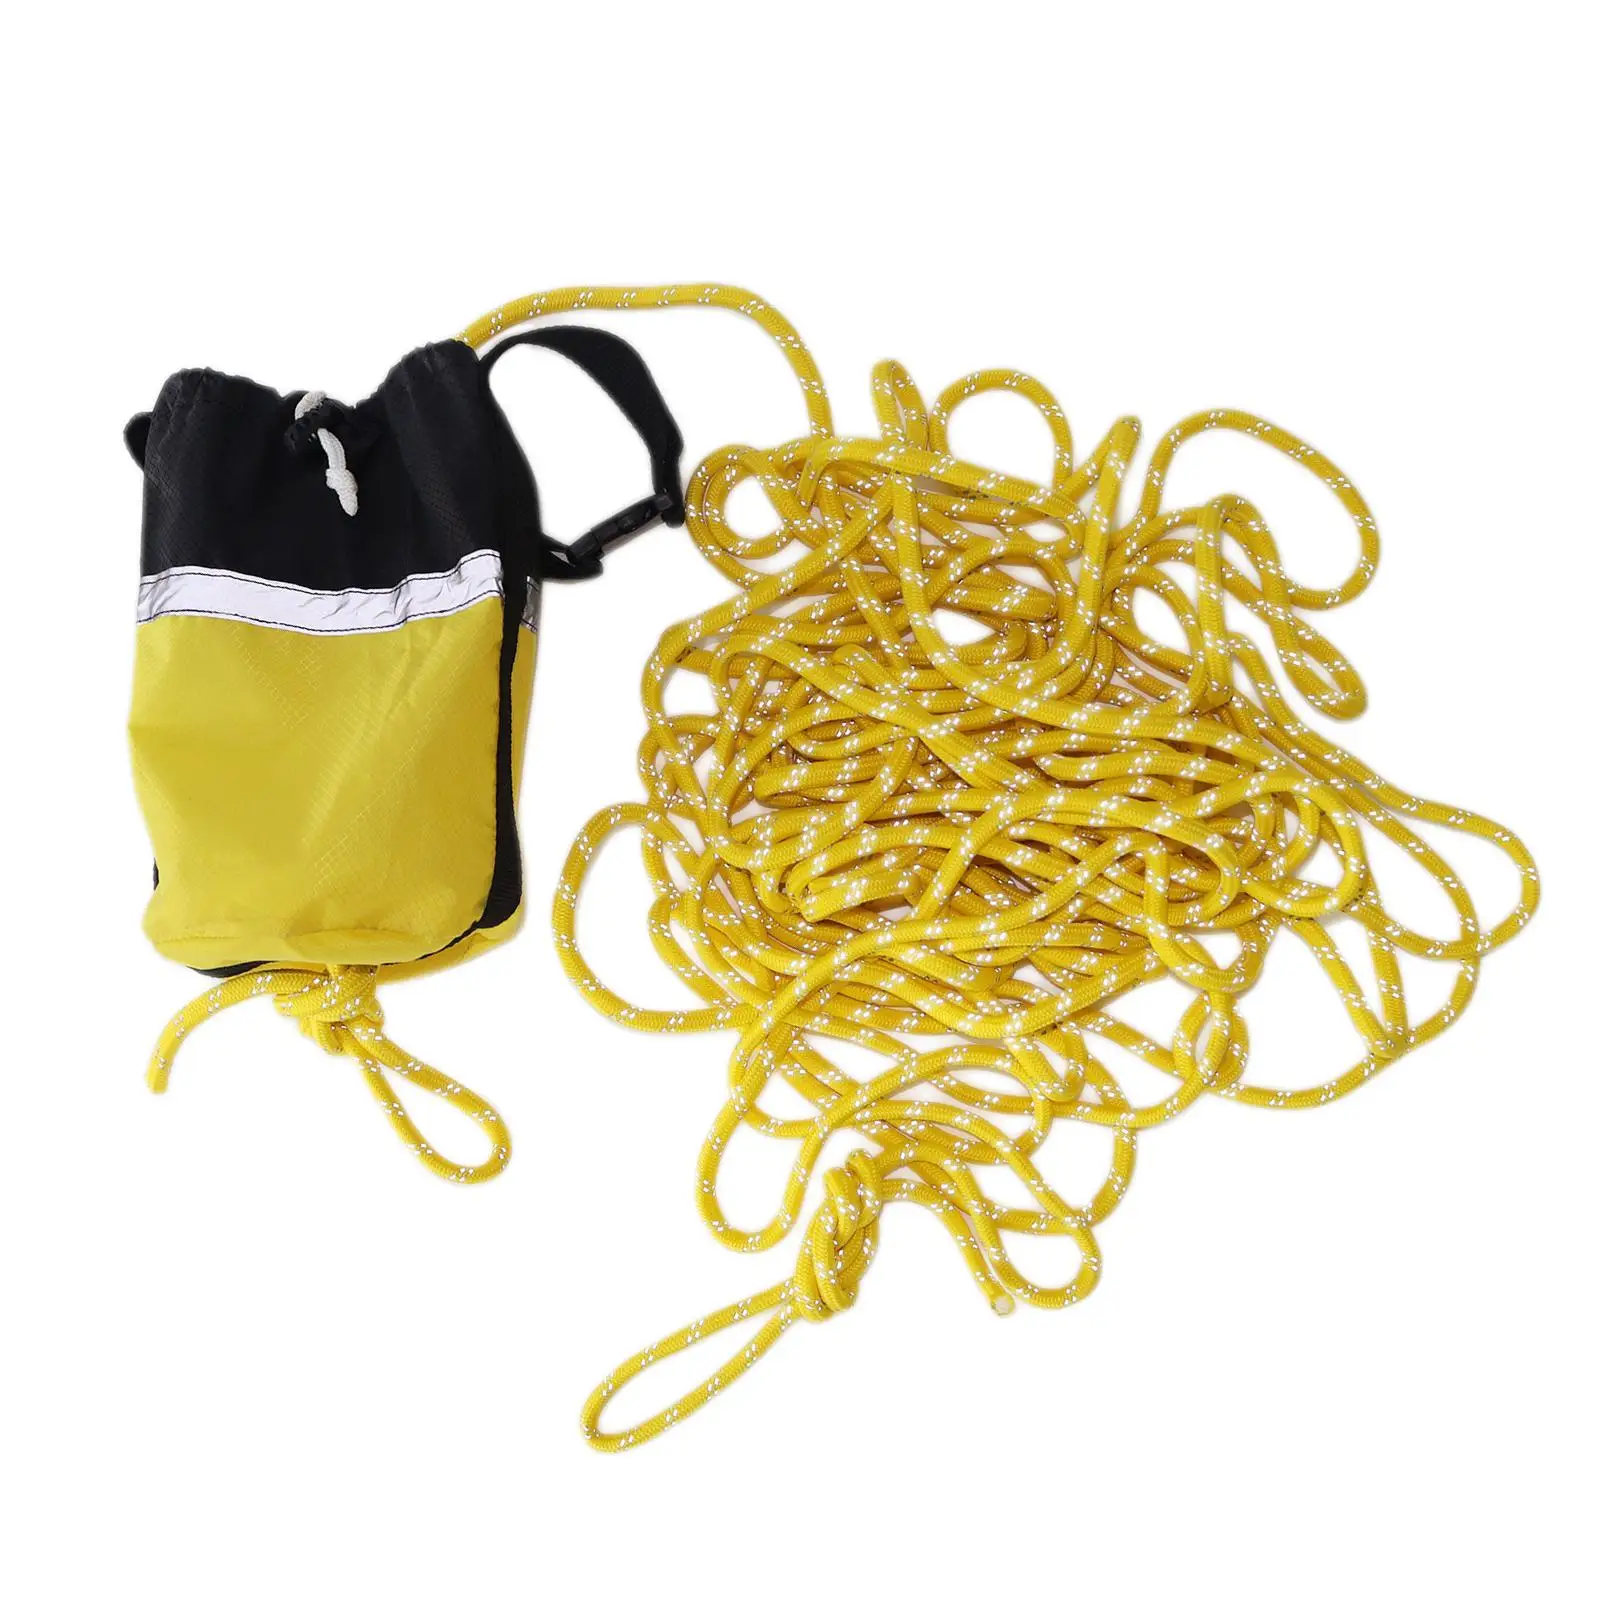 Kayaking Throw Bag Throw Rope 16M Marine High Visibility for Canoeing Boating Swimming Ice Fishing Outdoor Accessory